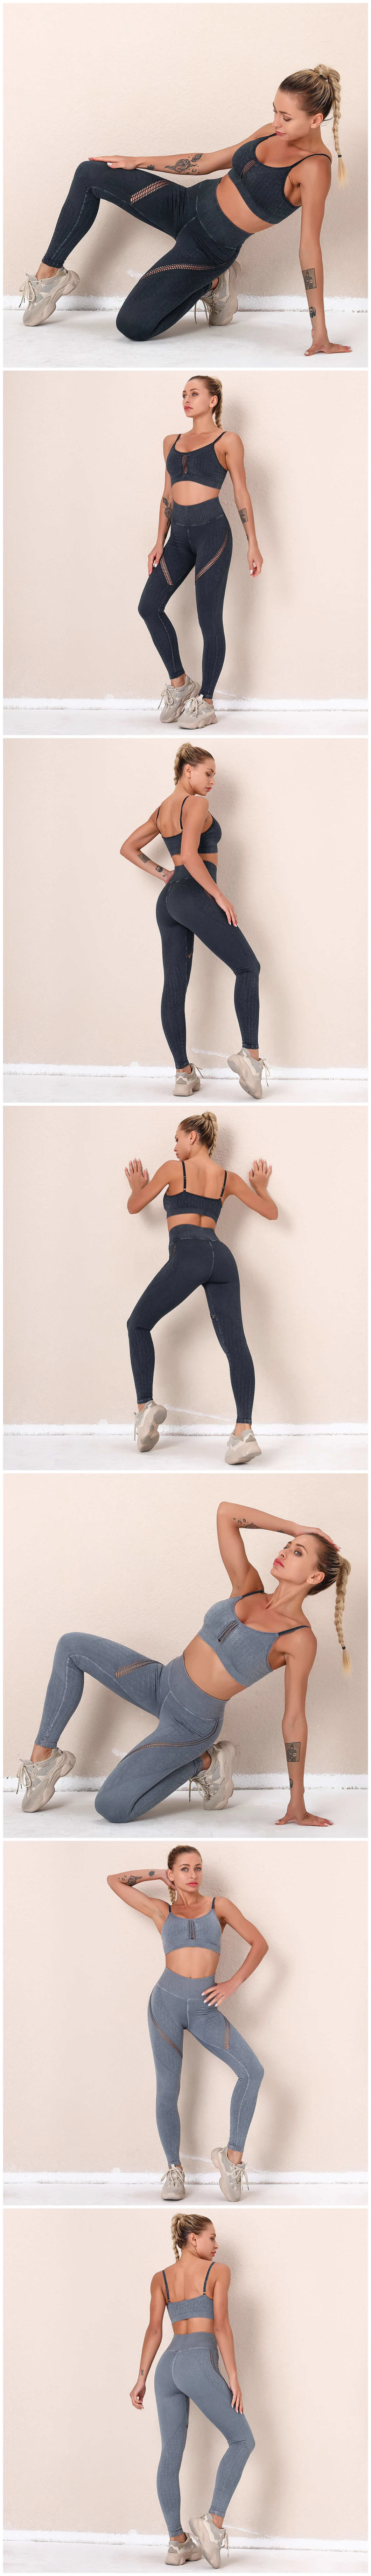 Wolesale Sport Clothing Seamless Activewear Tummy Control Workout Leggings for Women Yoga Pants